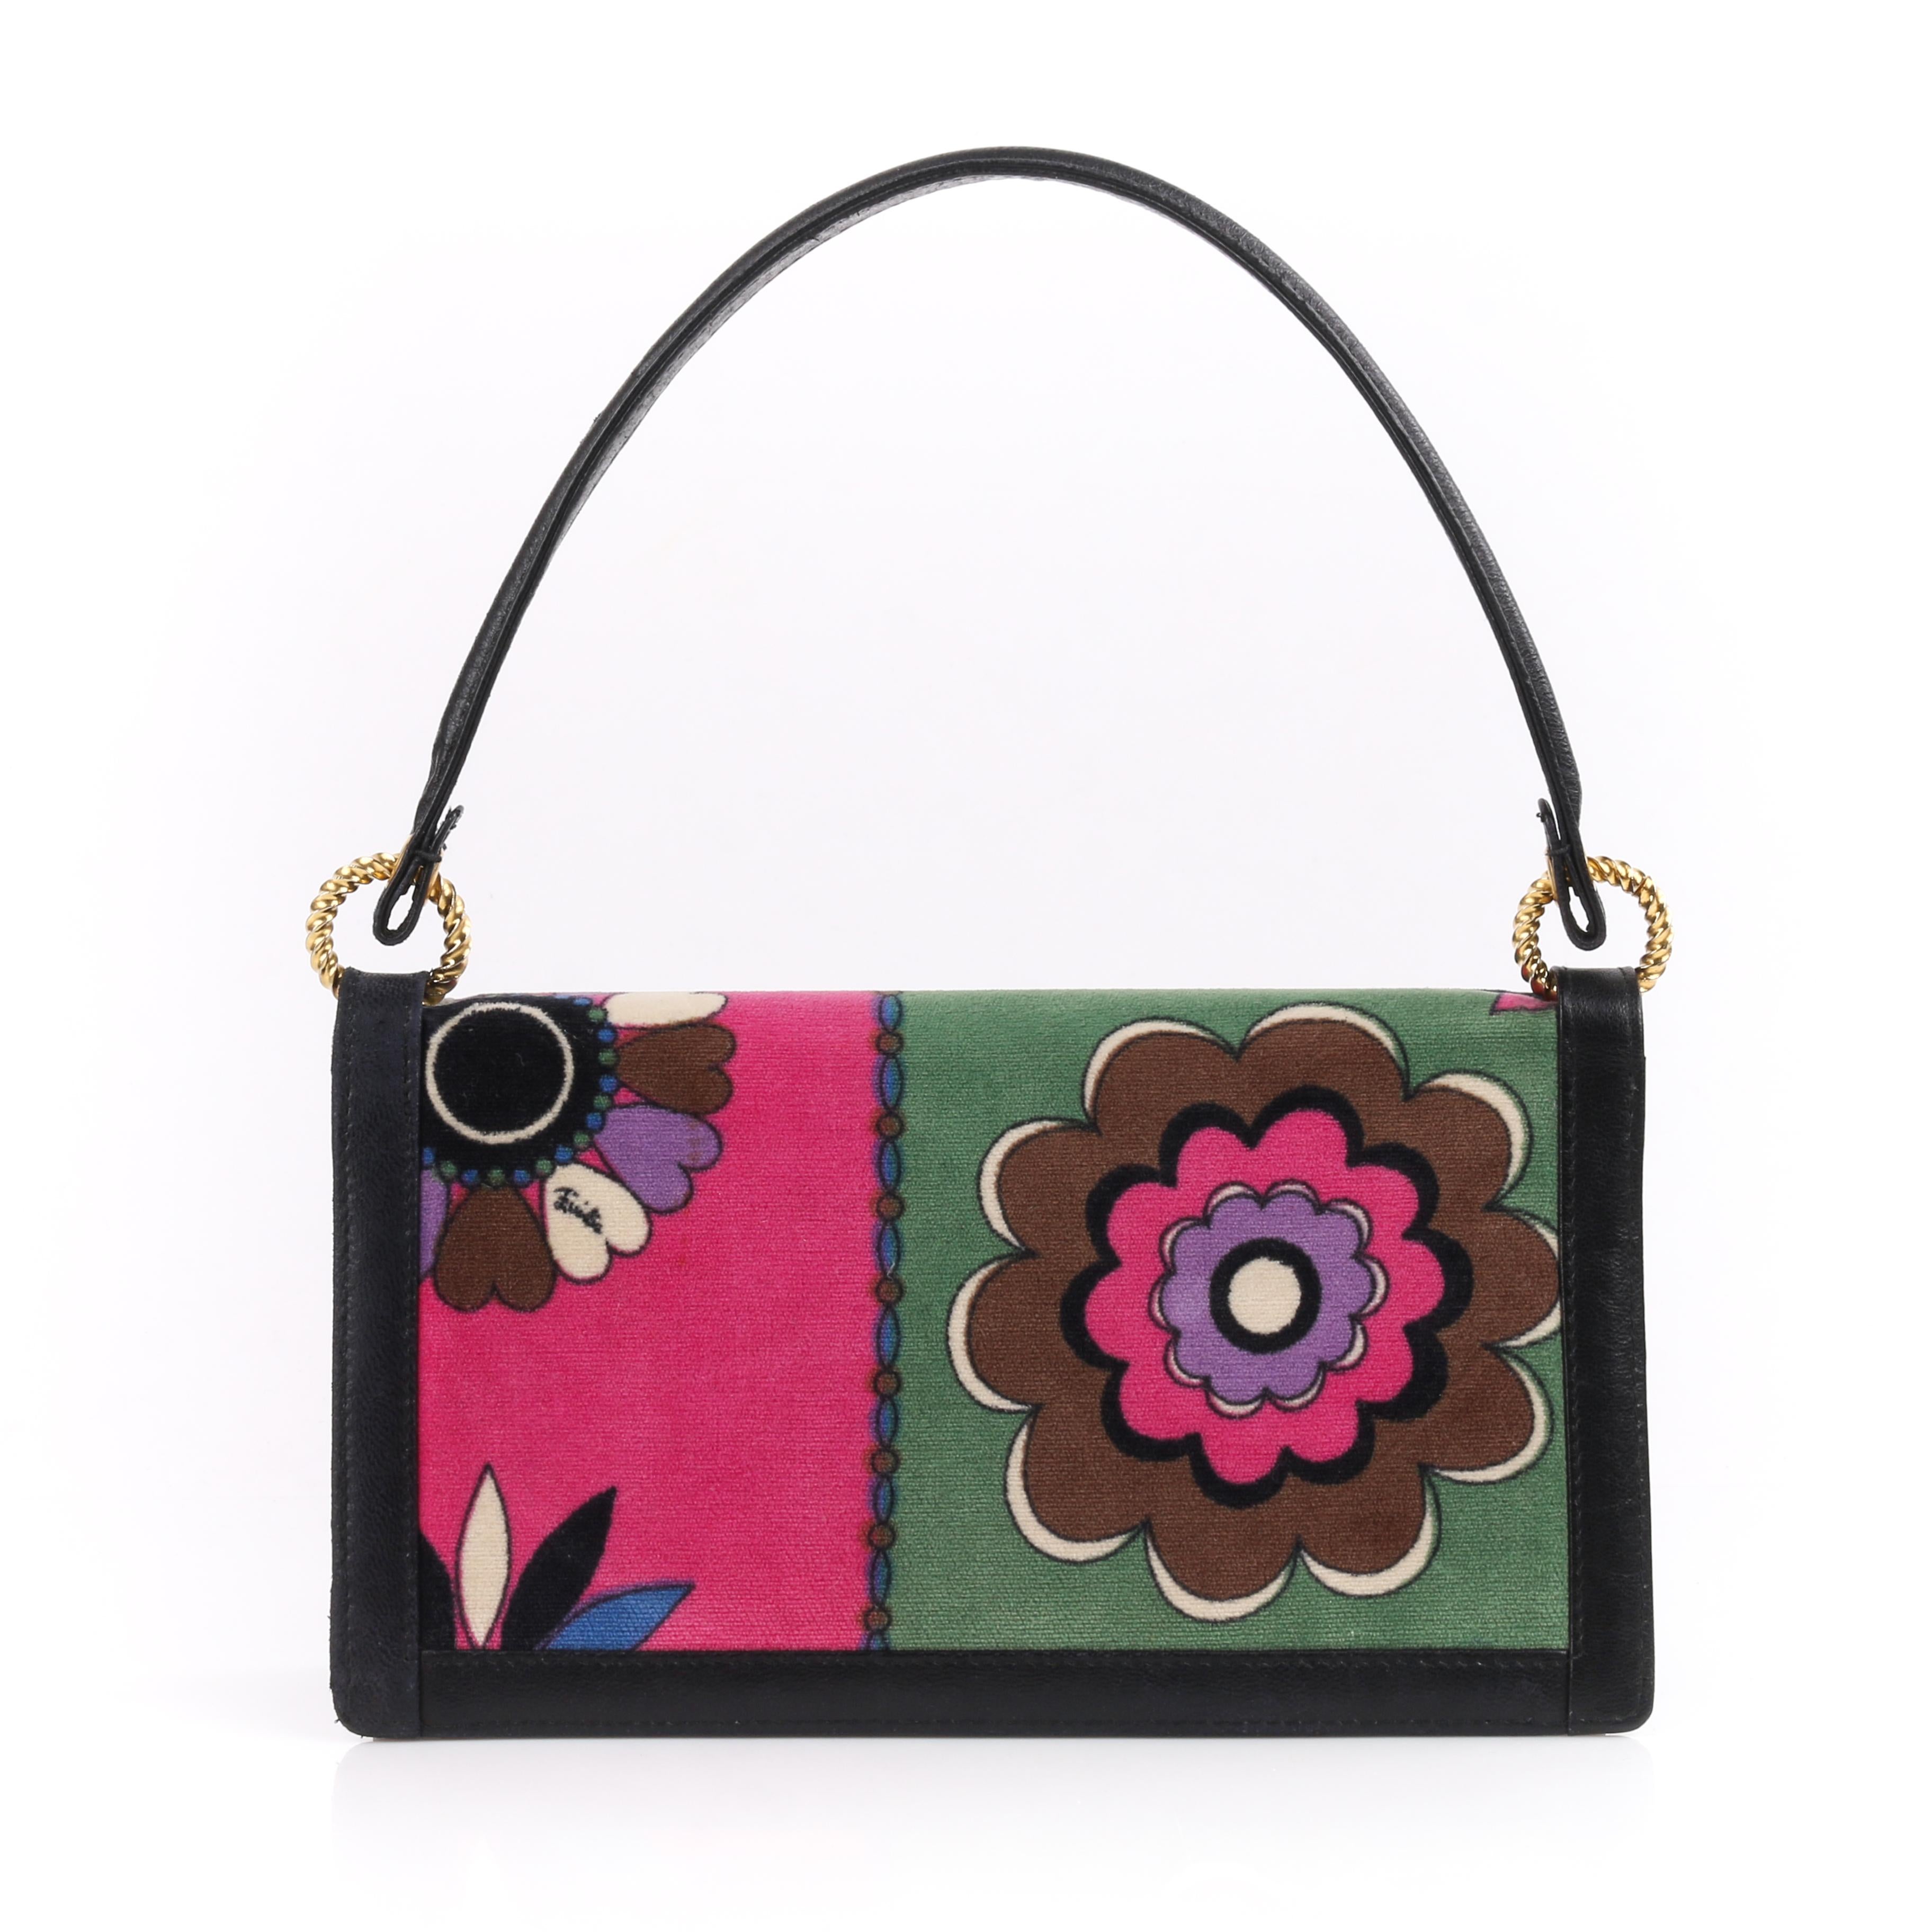 EMILIO PUCCI c.1960’s Floral Signature Print Multi-Color Velvet Leather Handbag 
 
Circa: 1960’s
Label(s): Emilio Pucci by Jana
Style: Handbag
Color(s): Shades of black, green, pink, blue, purple and off-white. 
Lined: Yes
Unmarked Fabric Content: